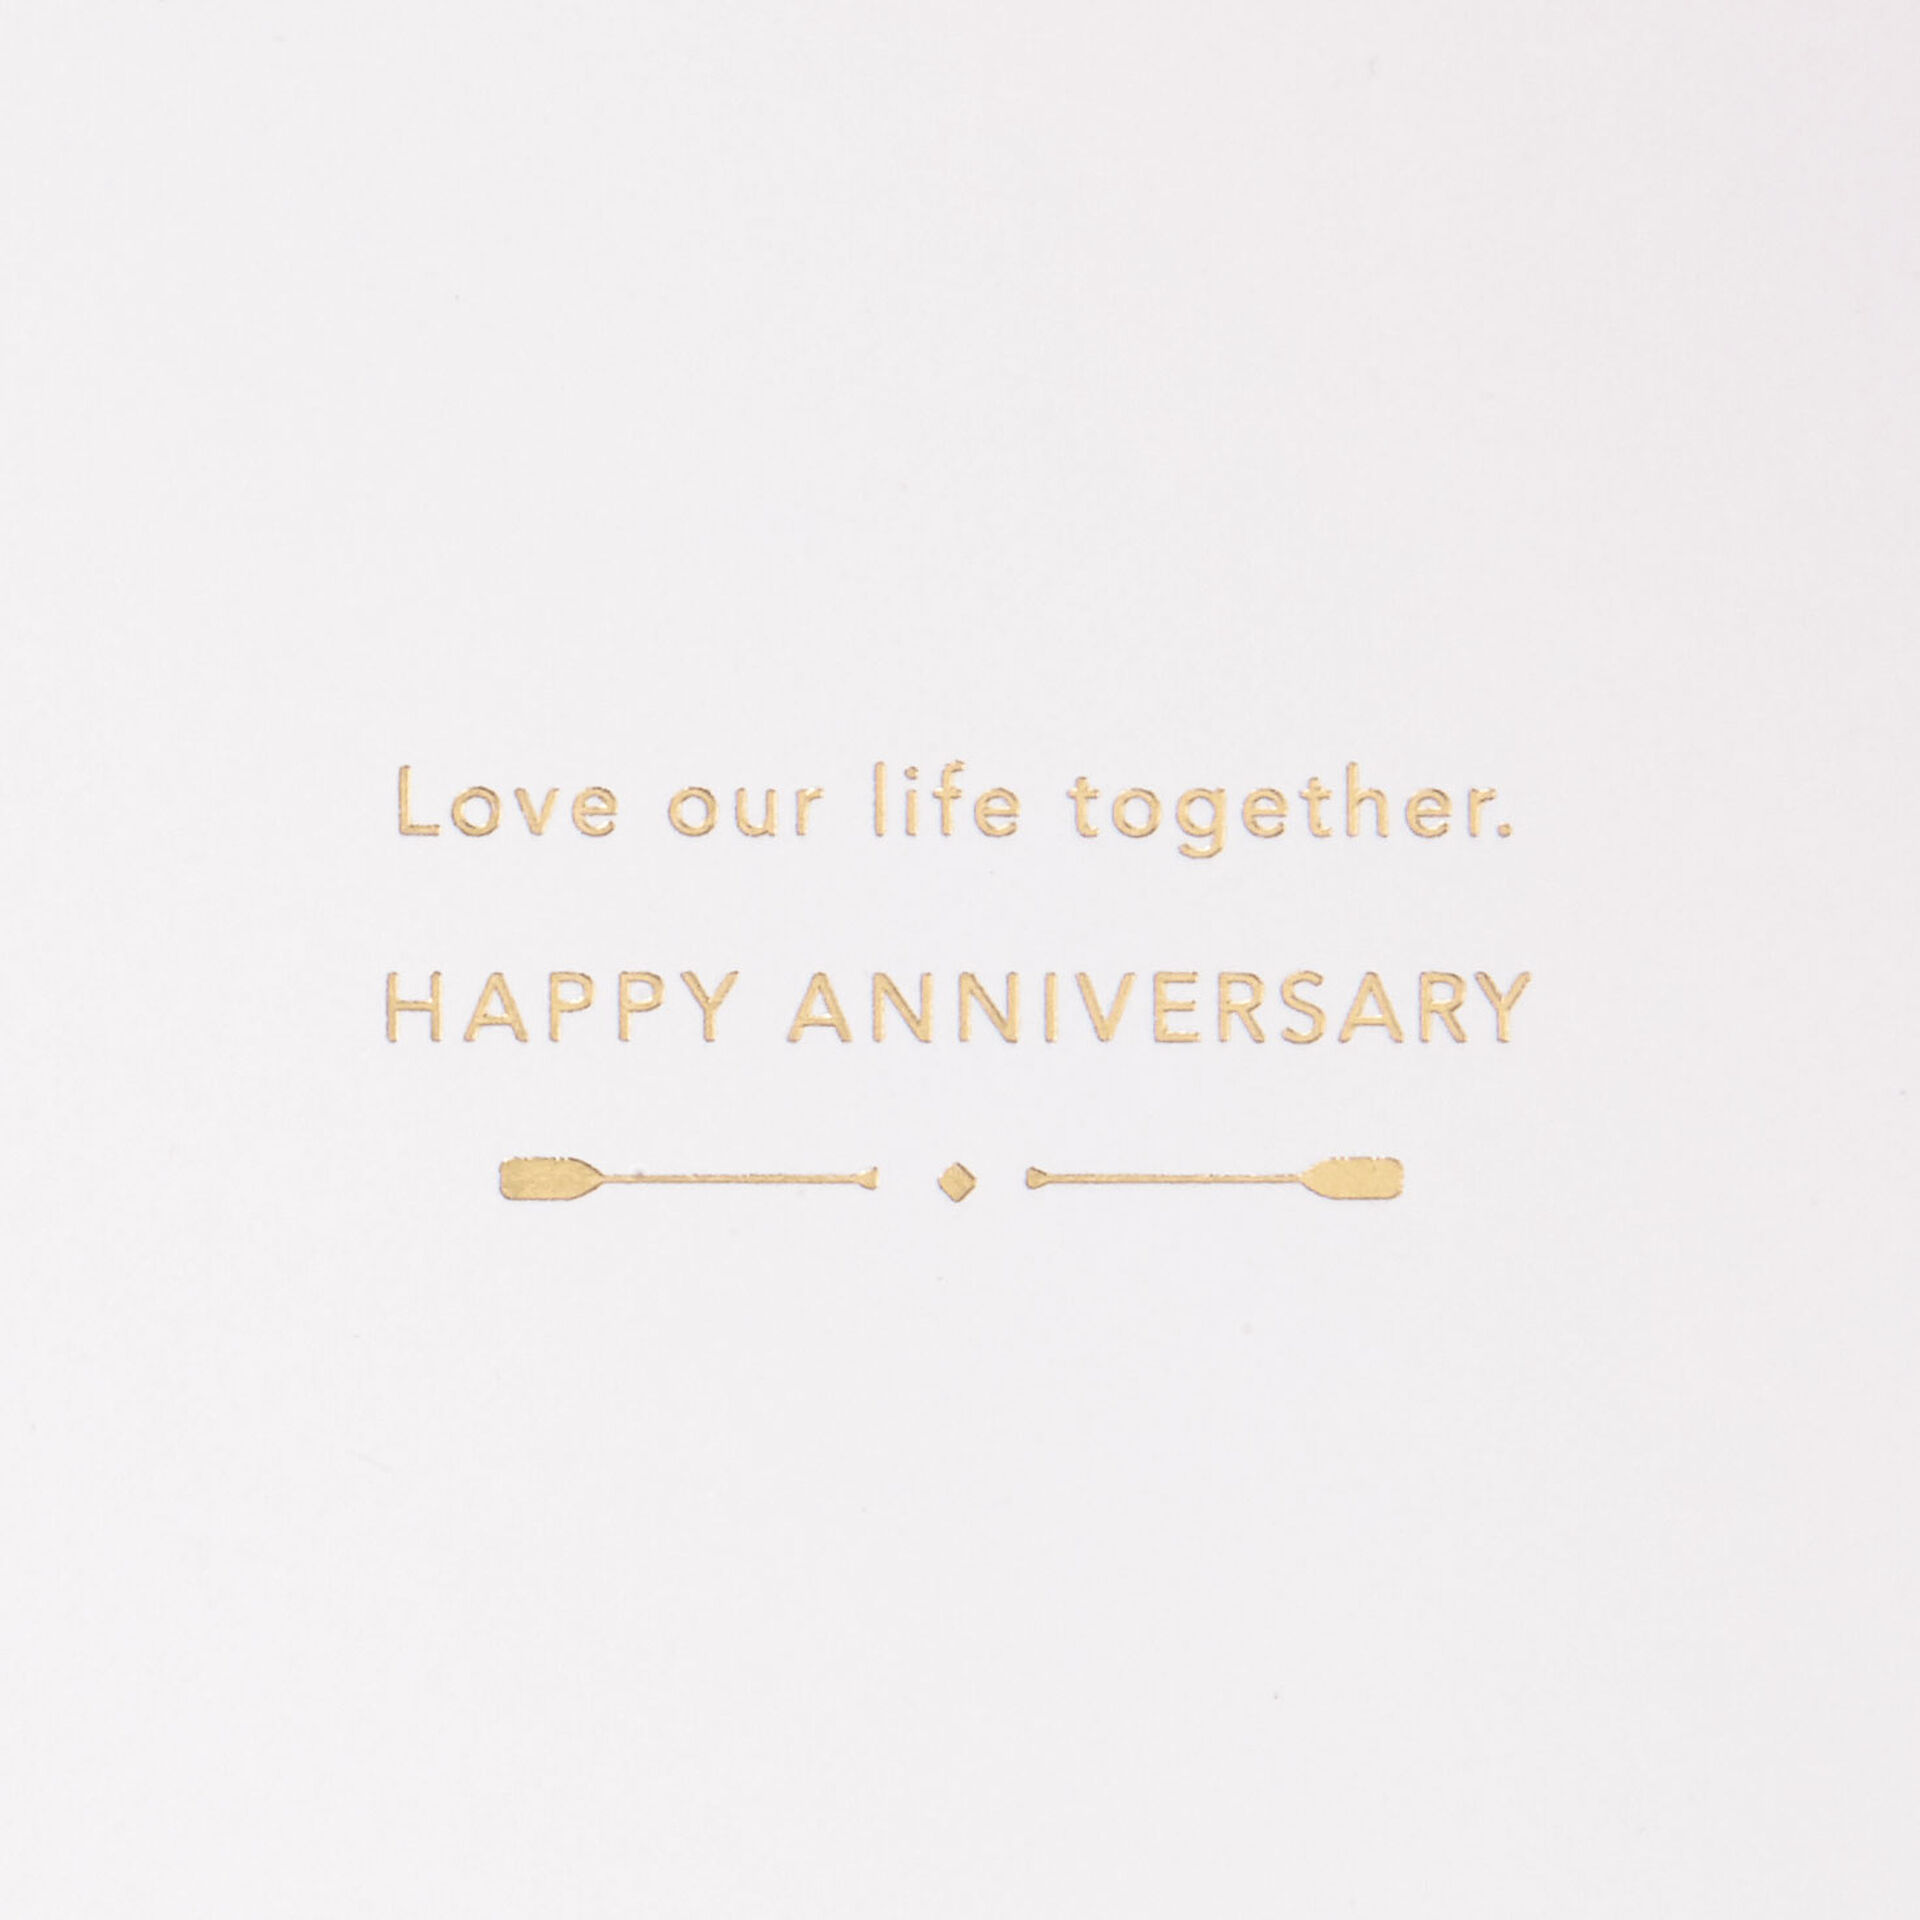 Love-Our-Life-Together-Boat-Oars-Anniversary-Card_799LAD9584_02